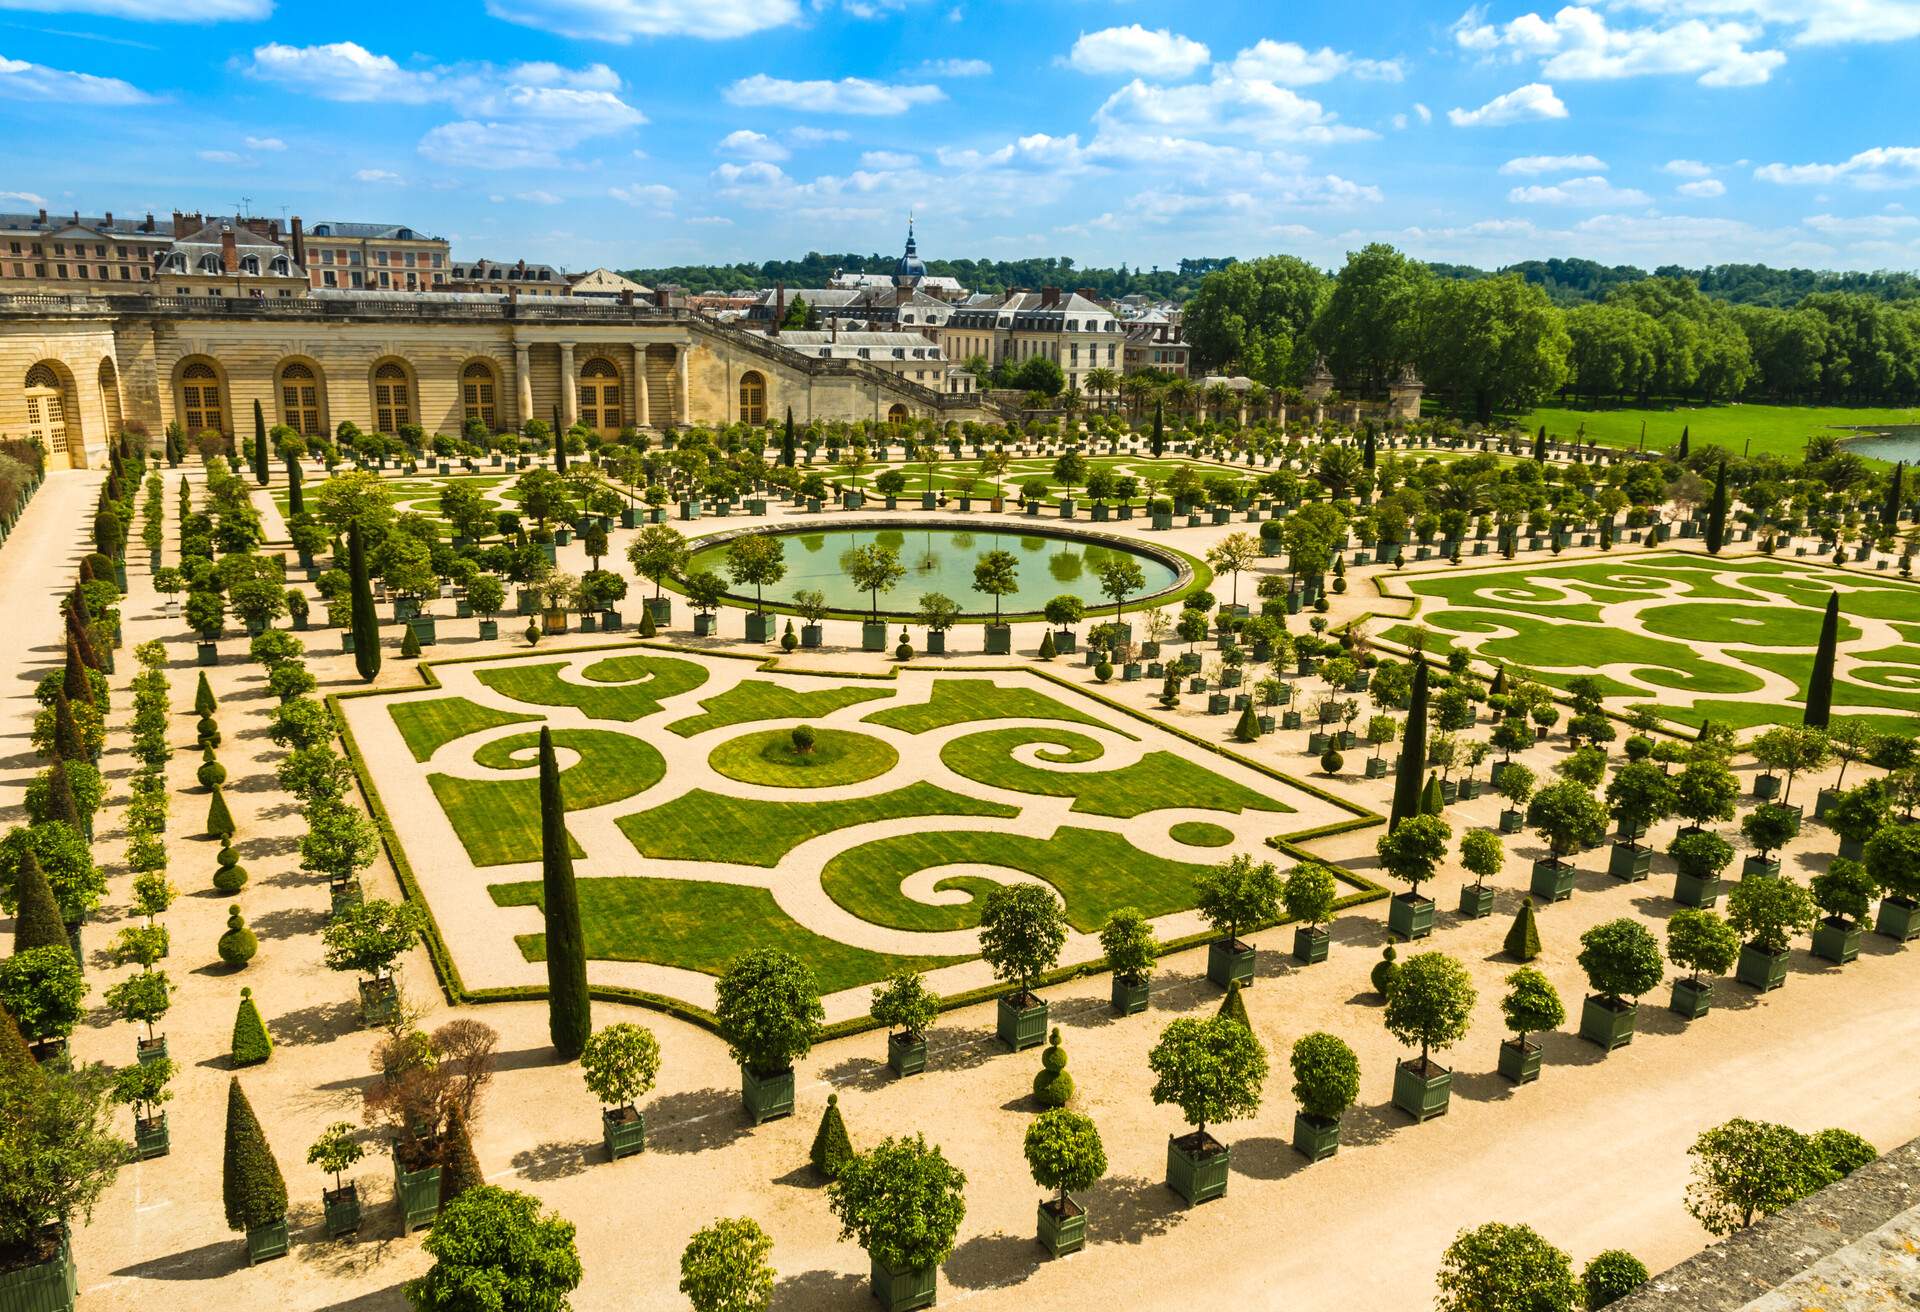 A birds eye perspective of the beautiful and perfectly cut garden with trees and bushes in Versailles, France